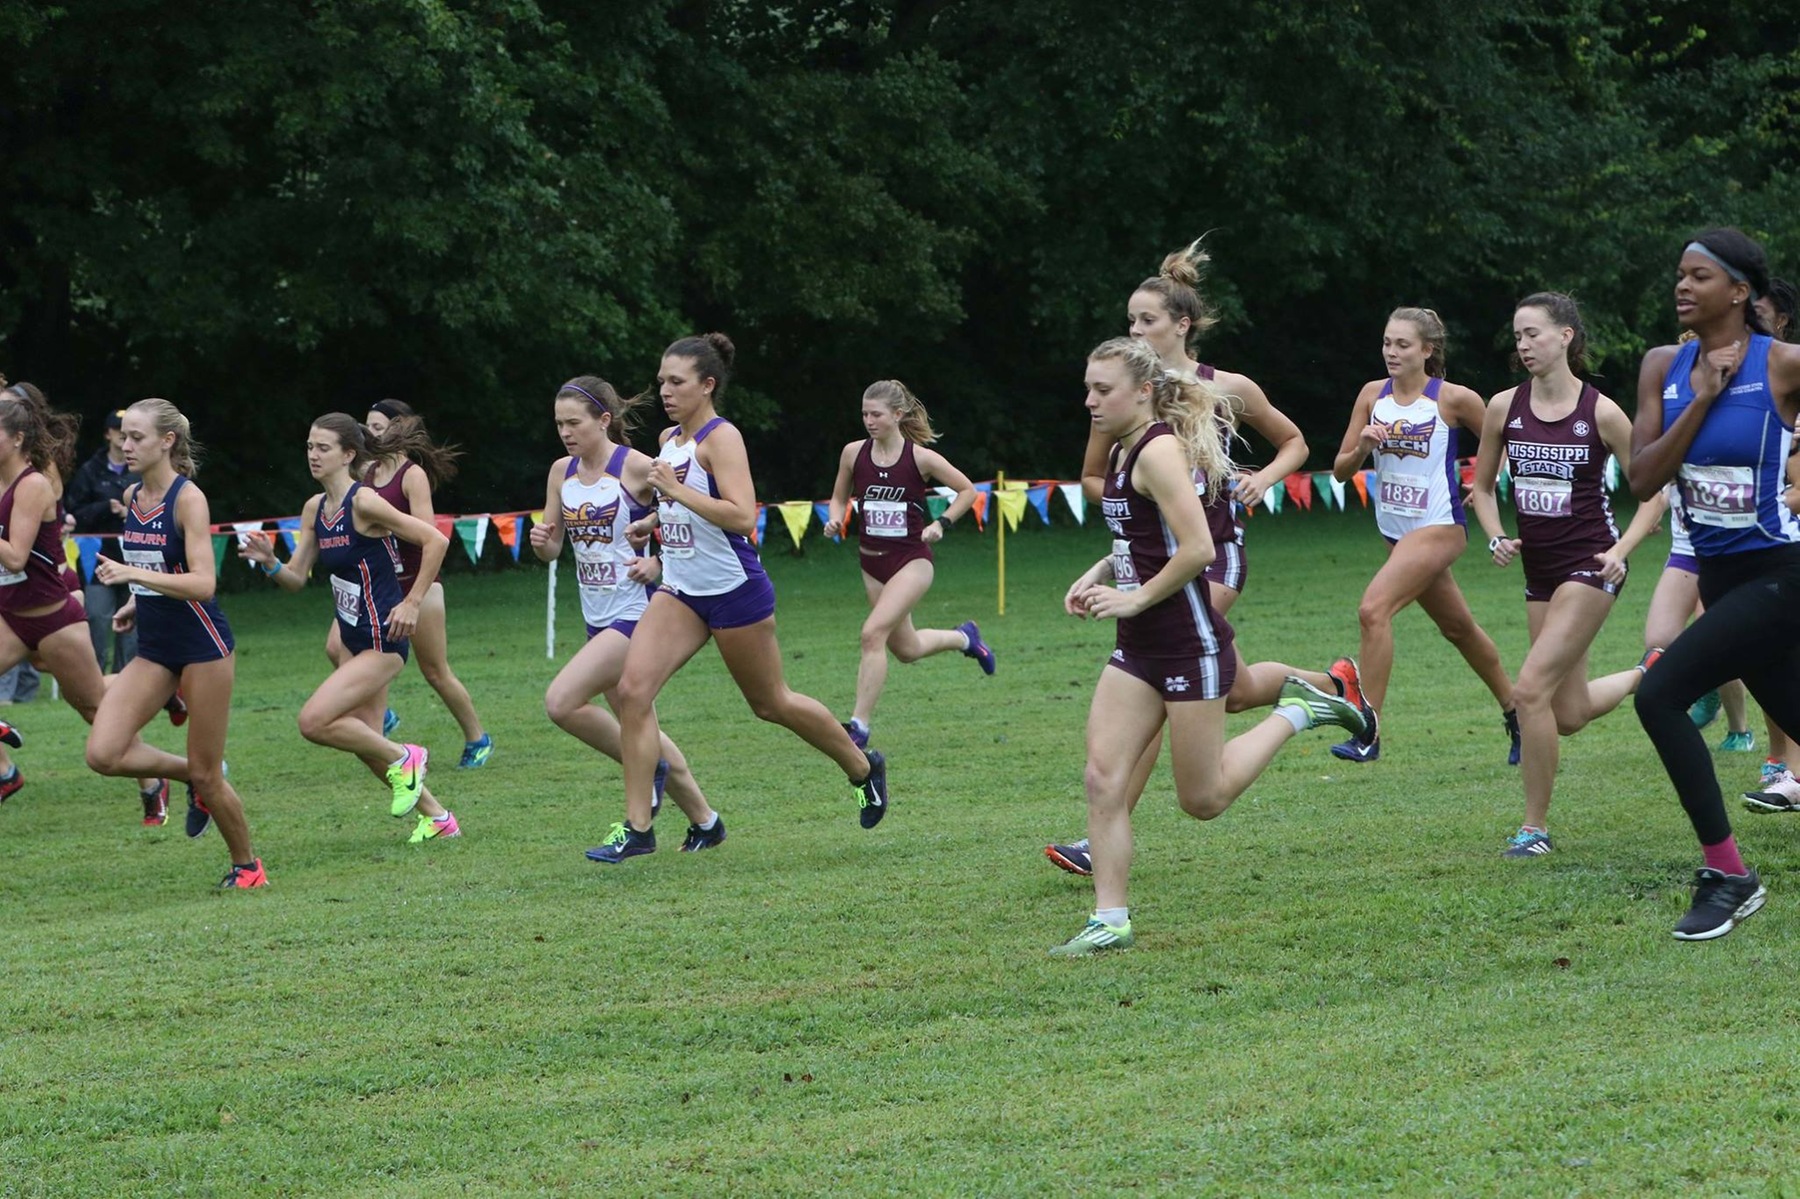 There’s no place like home: Tech cross country to open season with Golden Eagle Invitational